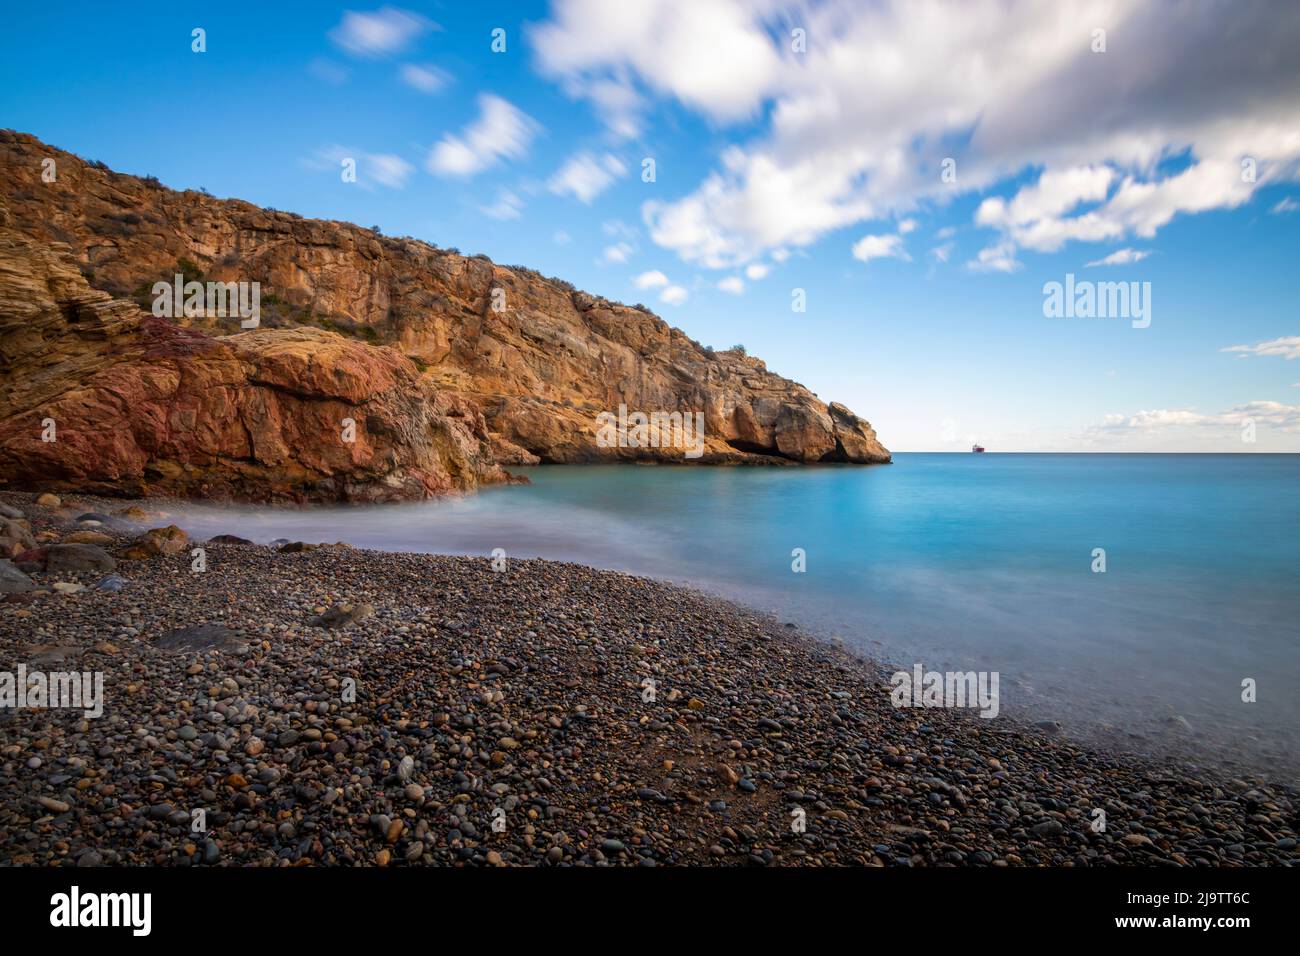 Photograph taken with long exposure on a beach with crystal blue waters in Cartagena, in the region of Murcia, Spain on a sunny day, with boulders on Stock Photo